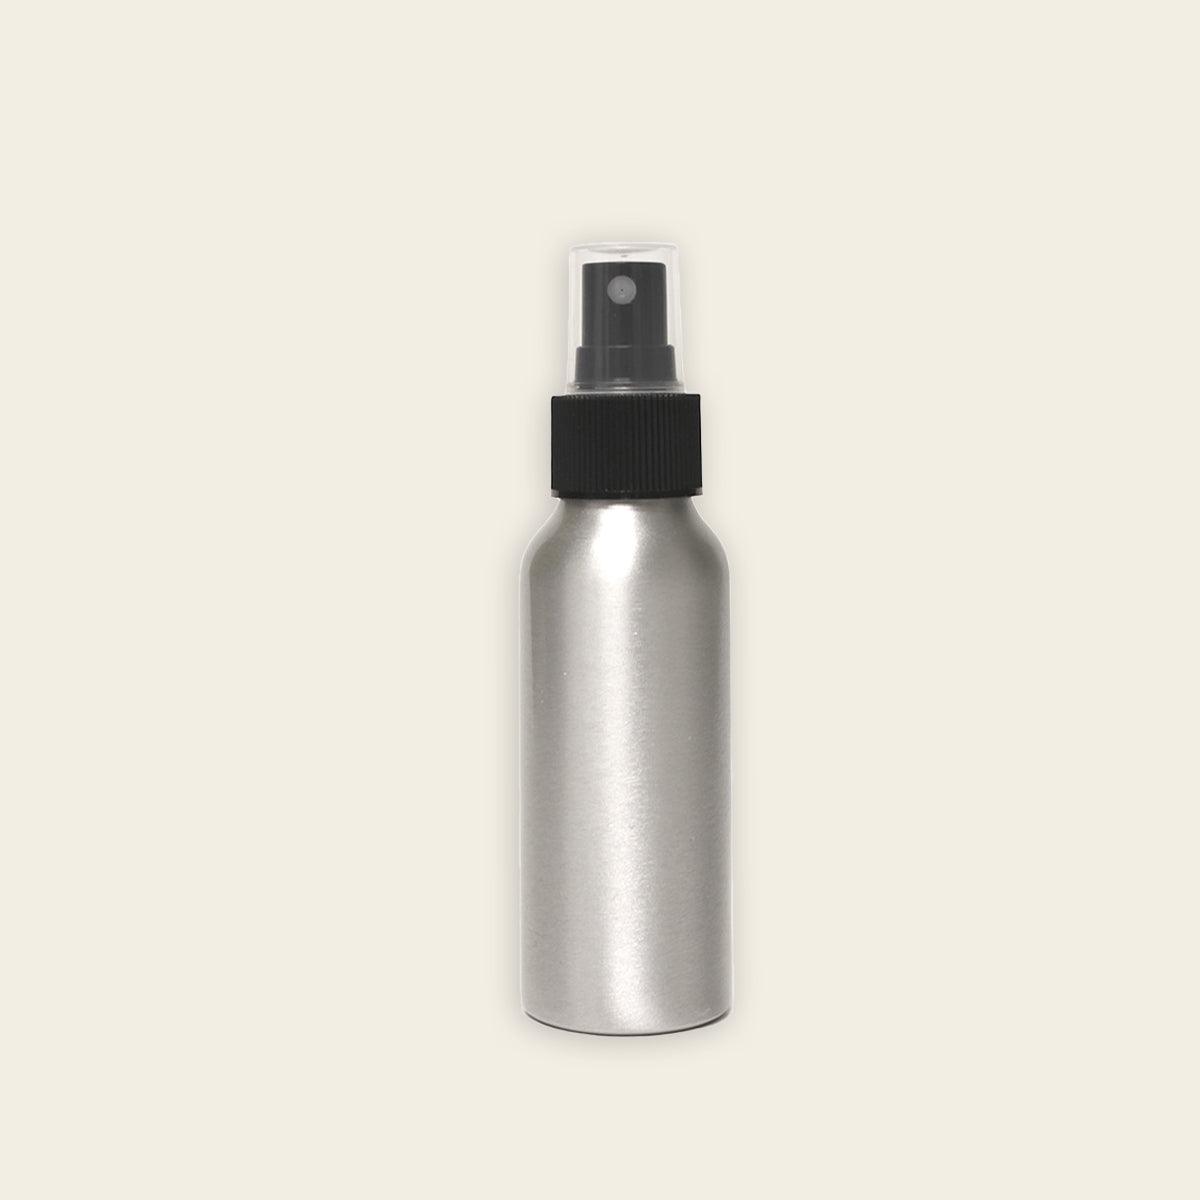 100ml aluminum bottle with mister - local - letsbelocal.ca